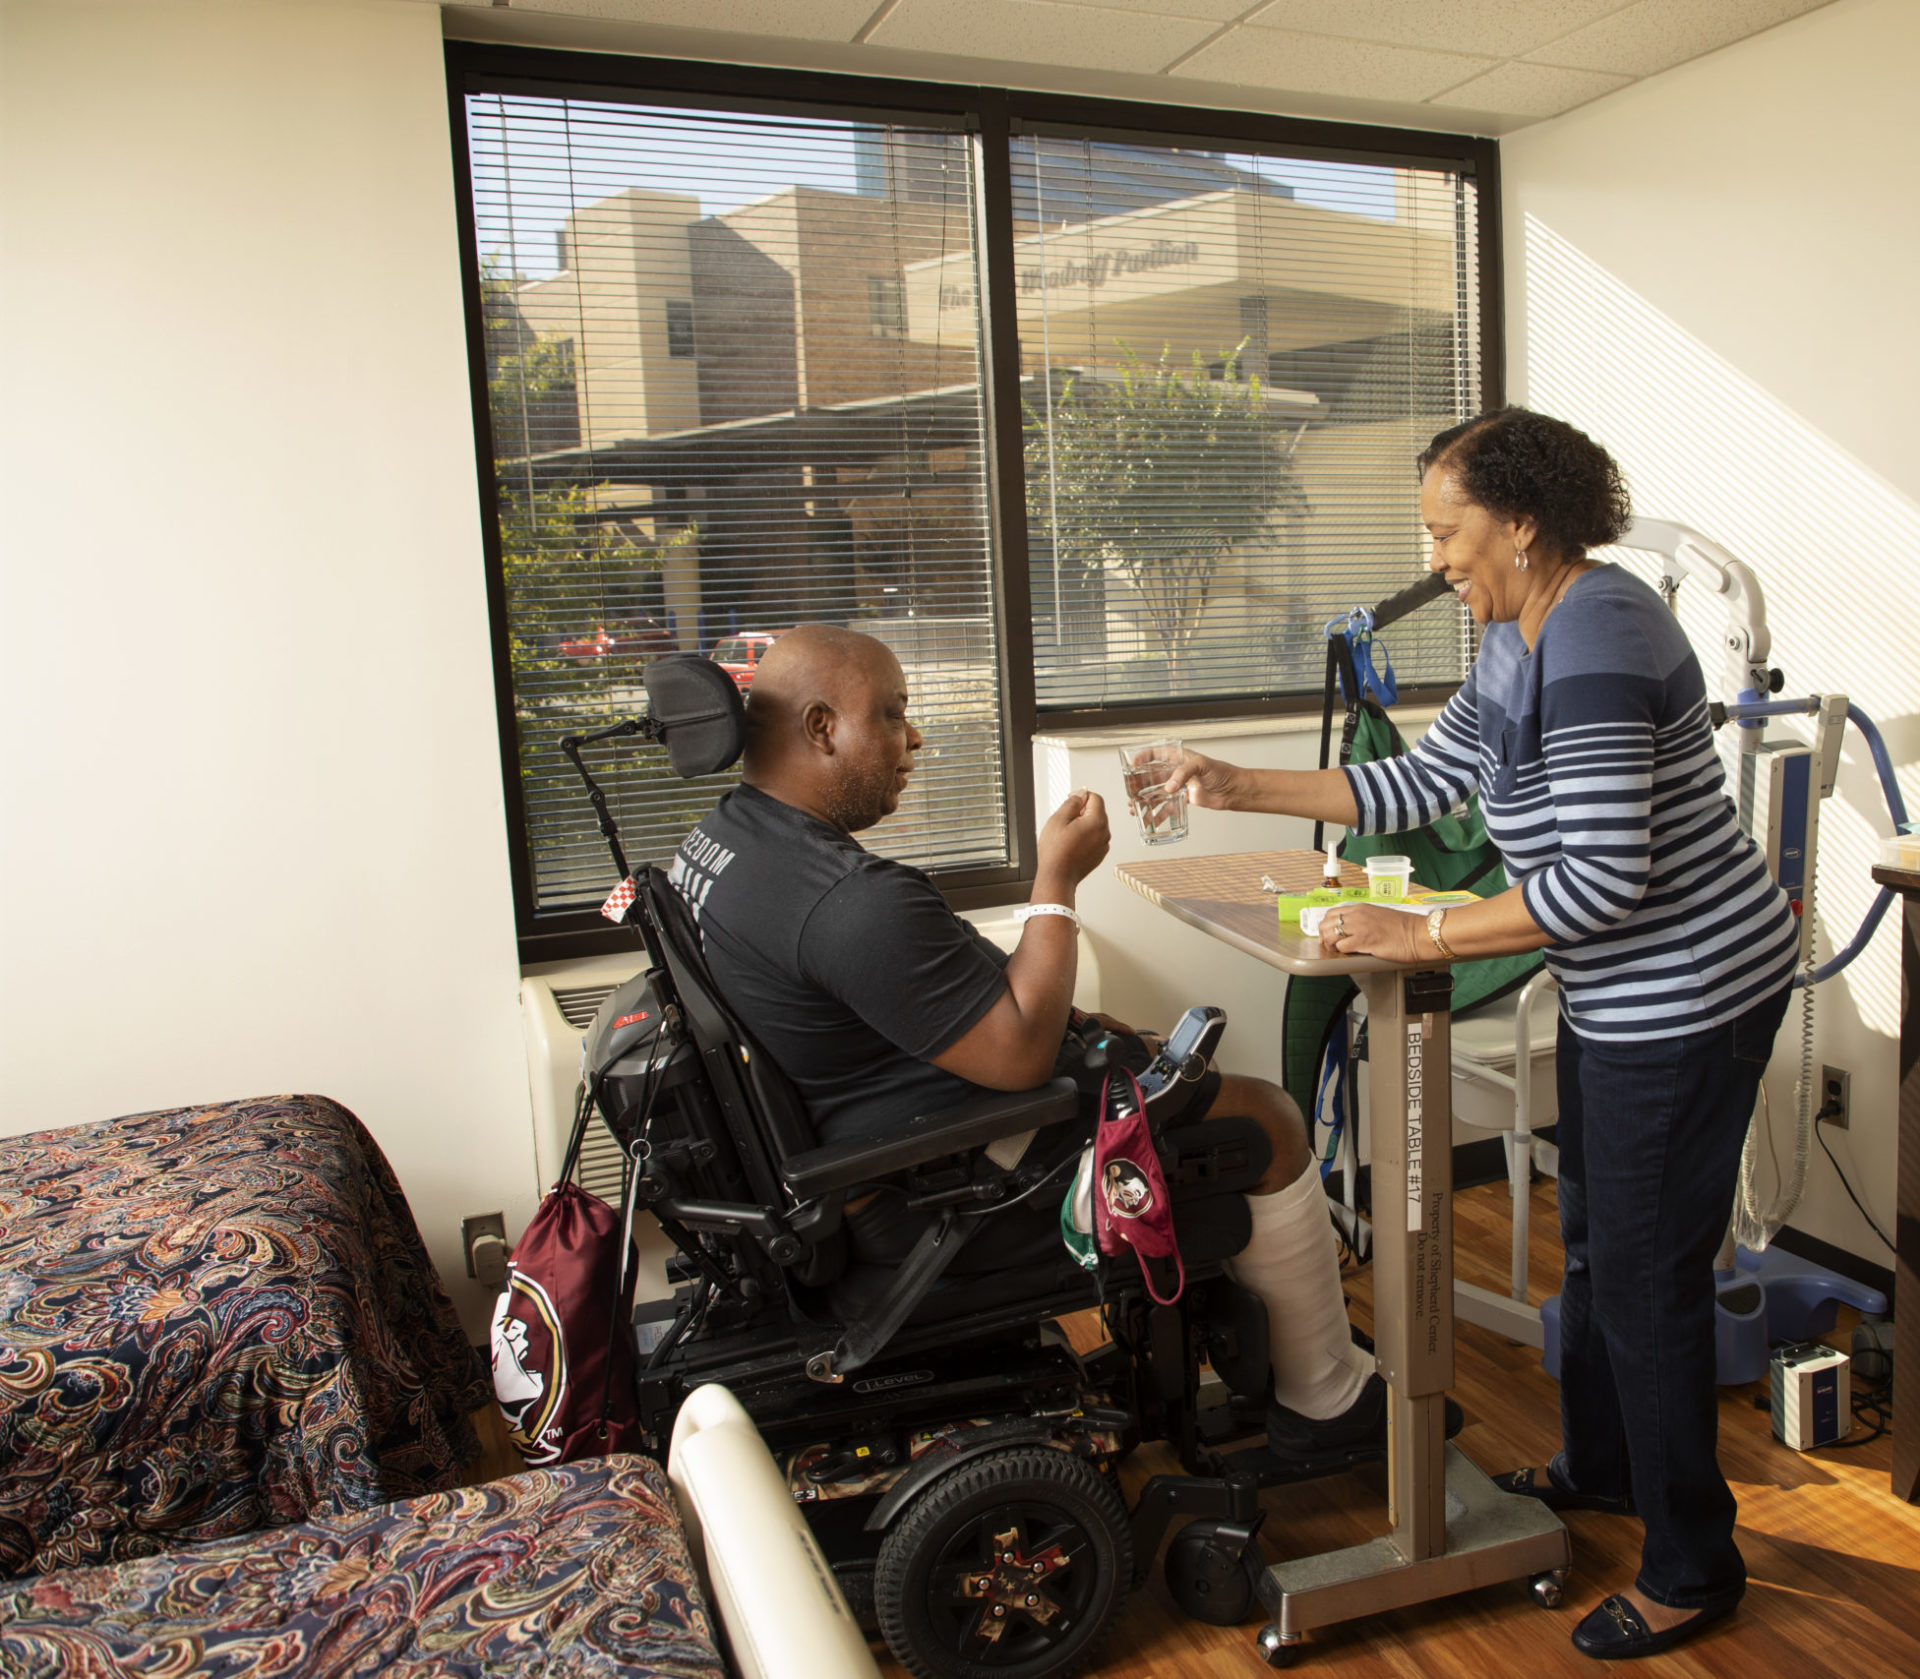 Family member assisting patient in the family housing center.